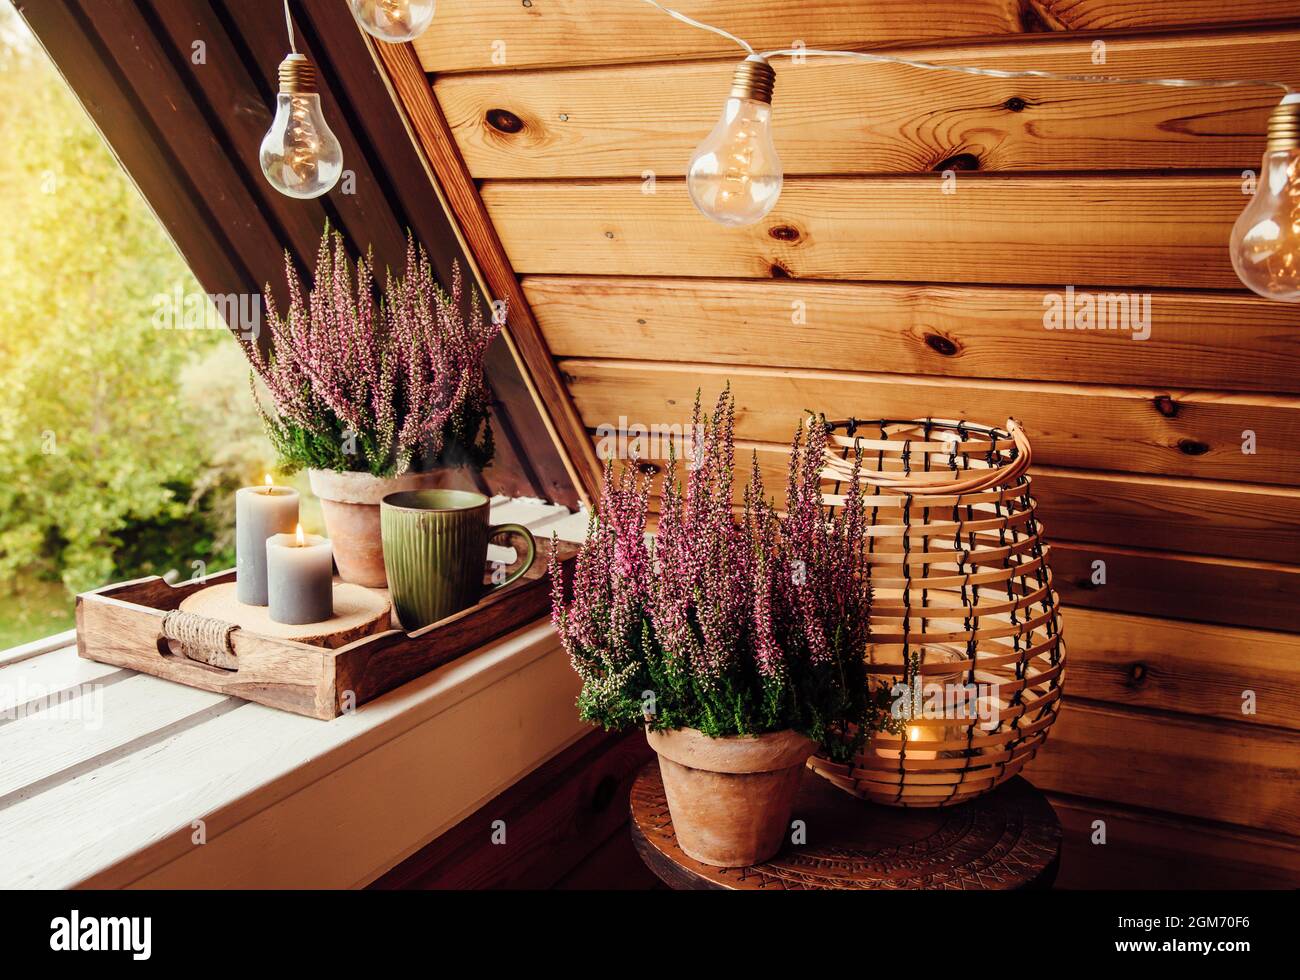 Small natural color wooden cabin balcony with heather flowers, candlelight flame and steaming cup of tea coffee. Cute autumn hygge home decor arrangem Stock Photo